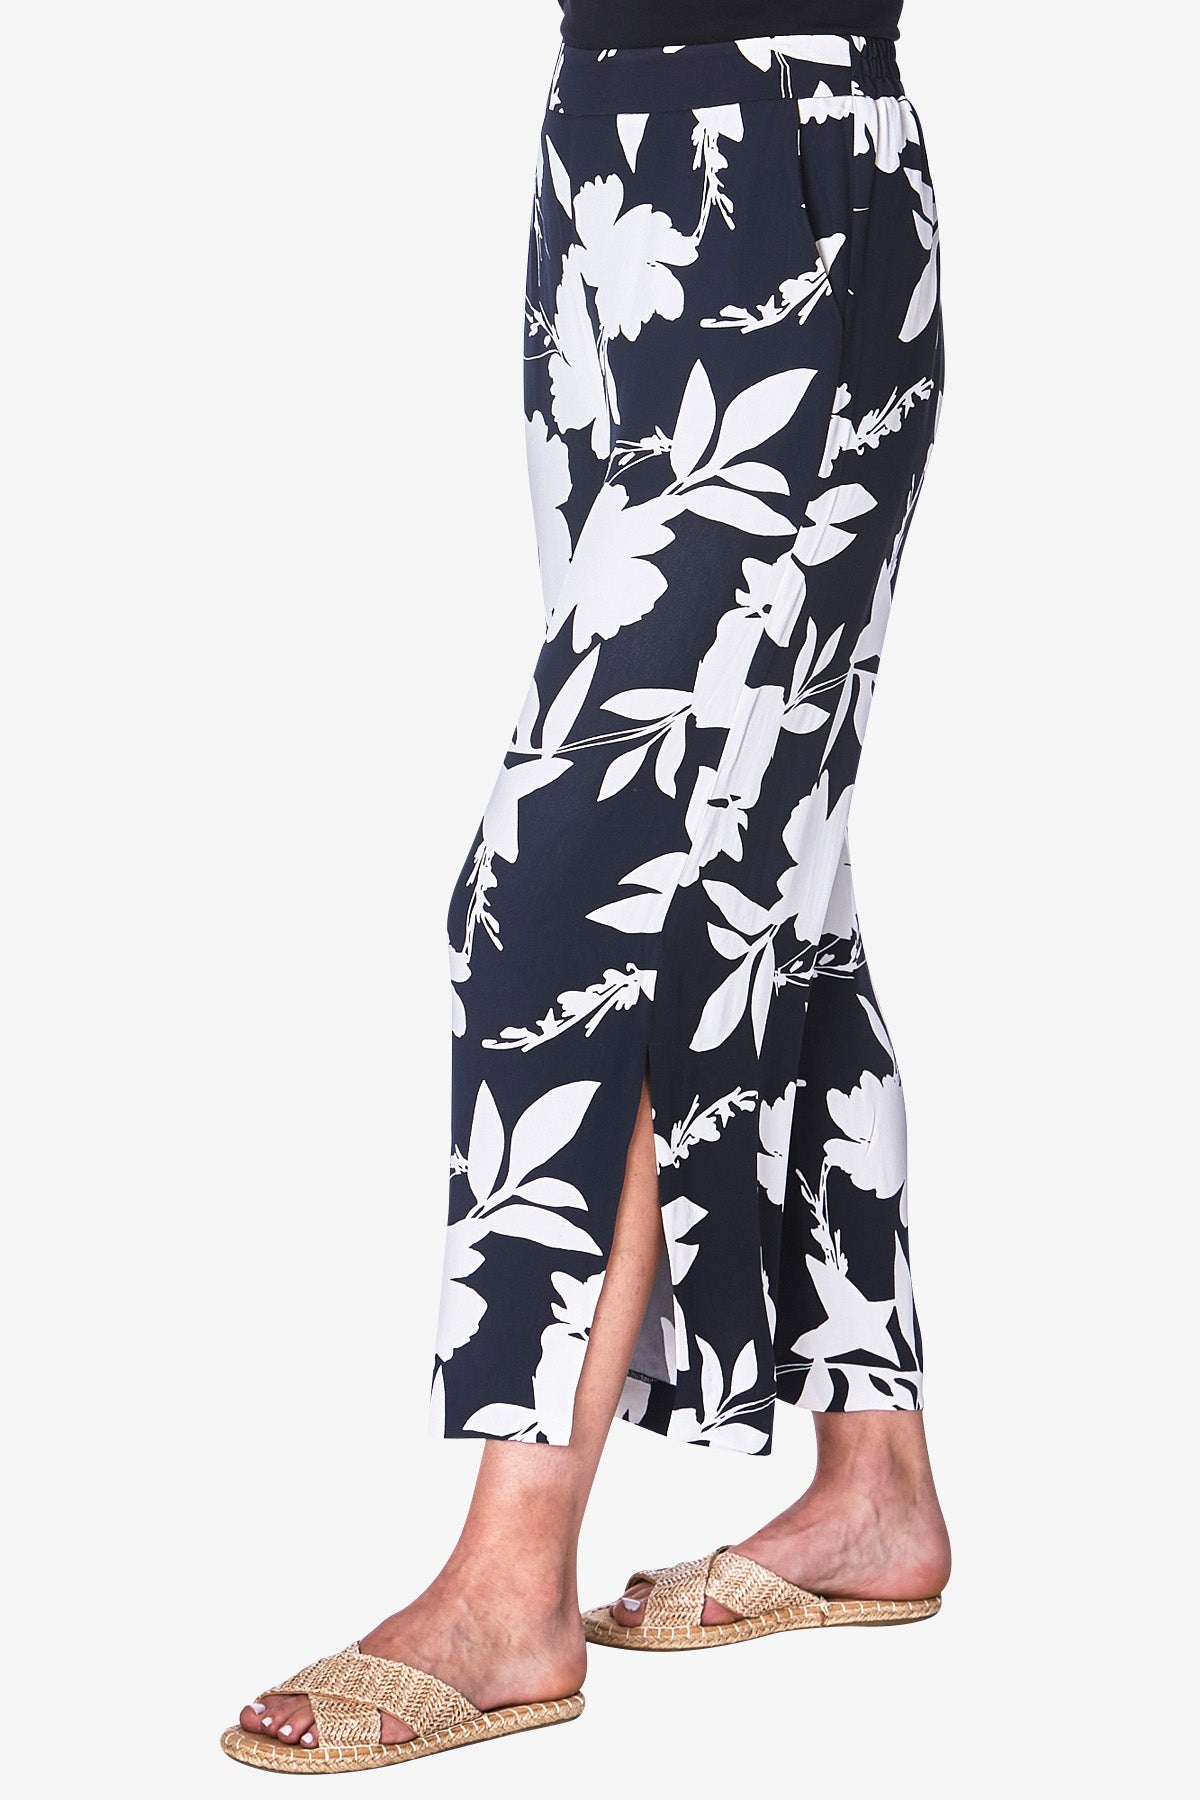 Painted Floral Culottes Black and White